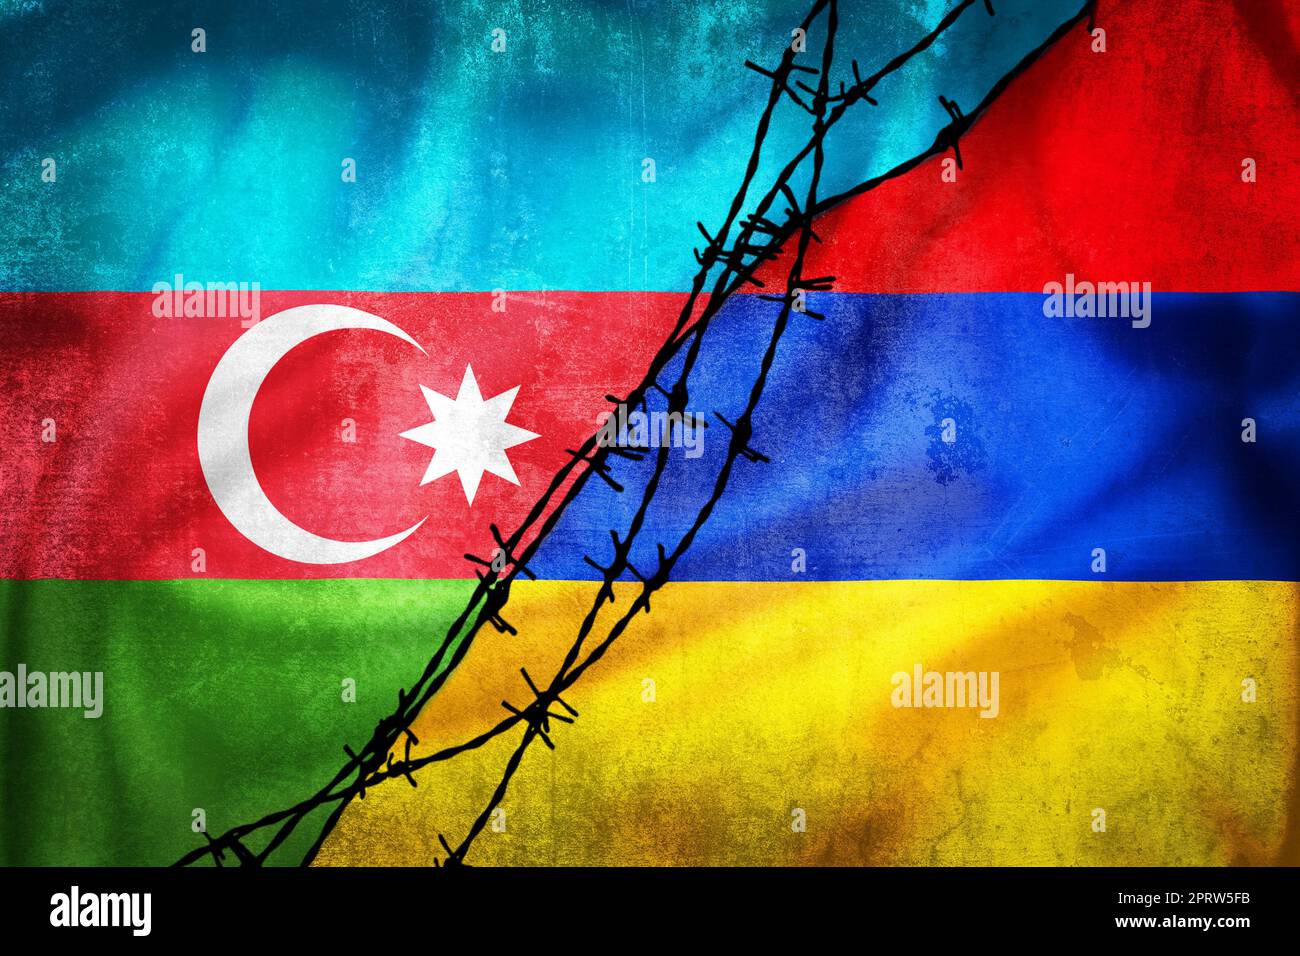 Grunge flags of Azerbaijan and Armenia divided by barb wire illustration Stock Photo